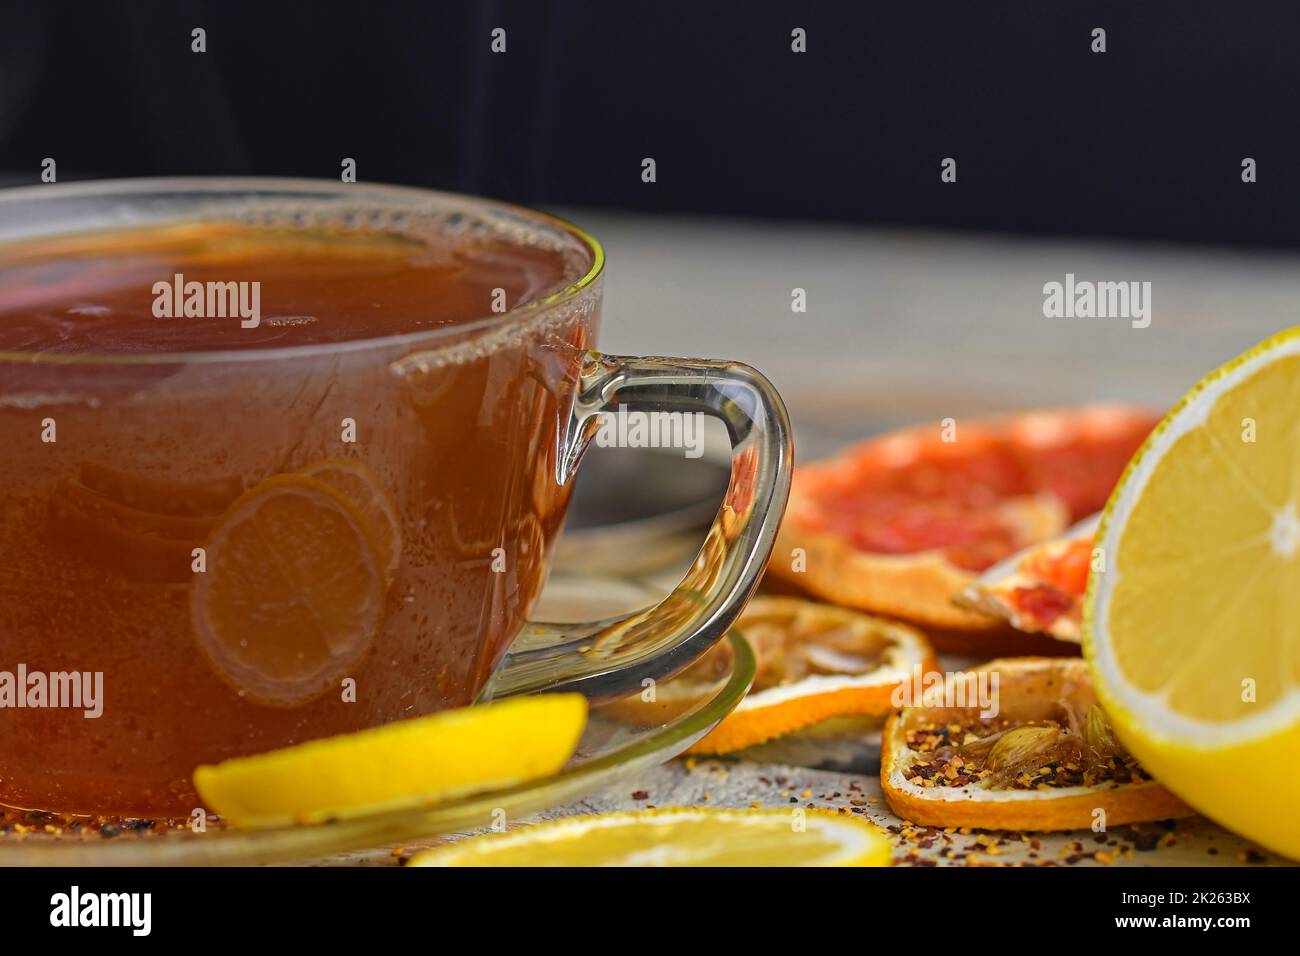 Cup with hot tea and steam on black. Glass cup of black tea with cinnamon sticks, anise star, lemon and dried fruit on white wooden table background. Macro image Stock Photo